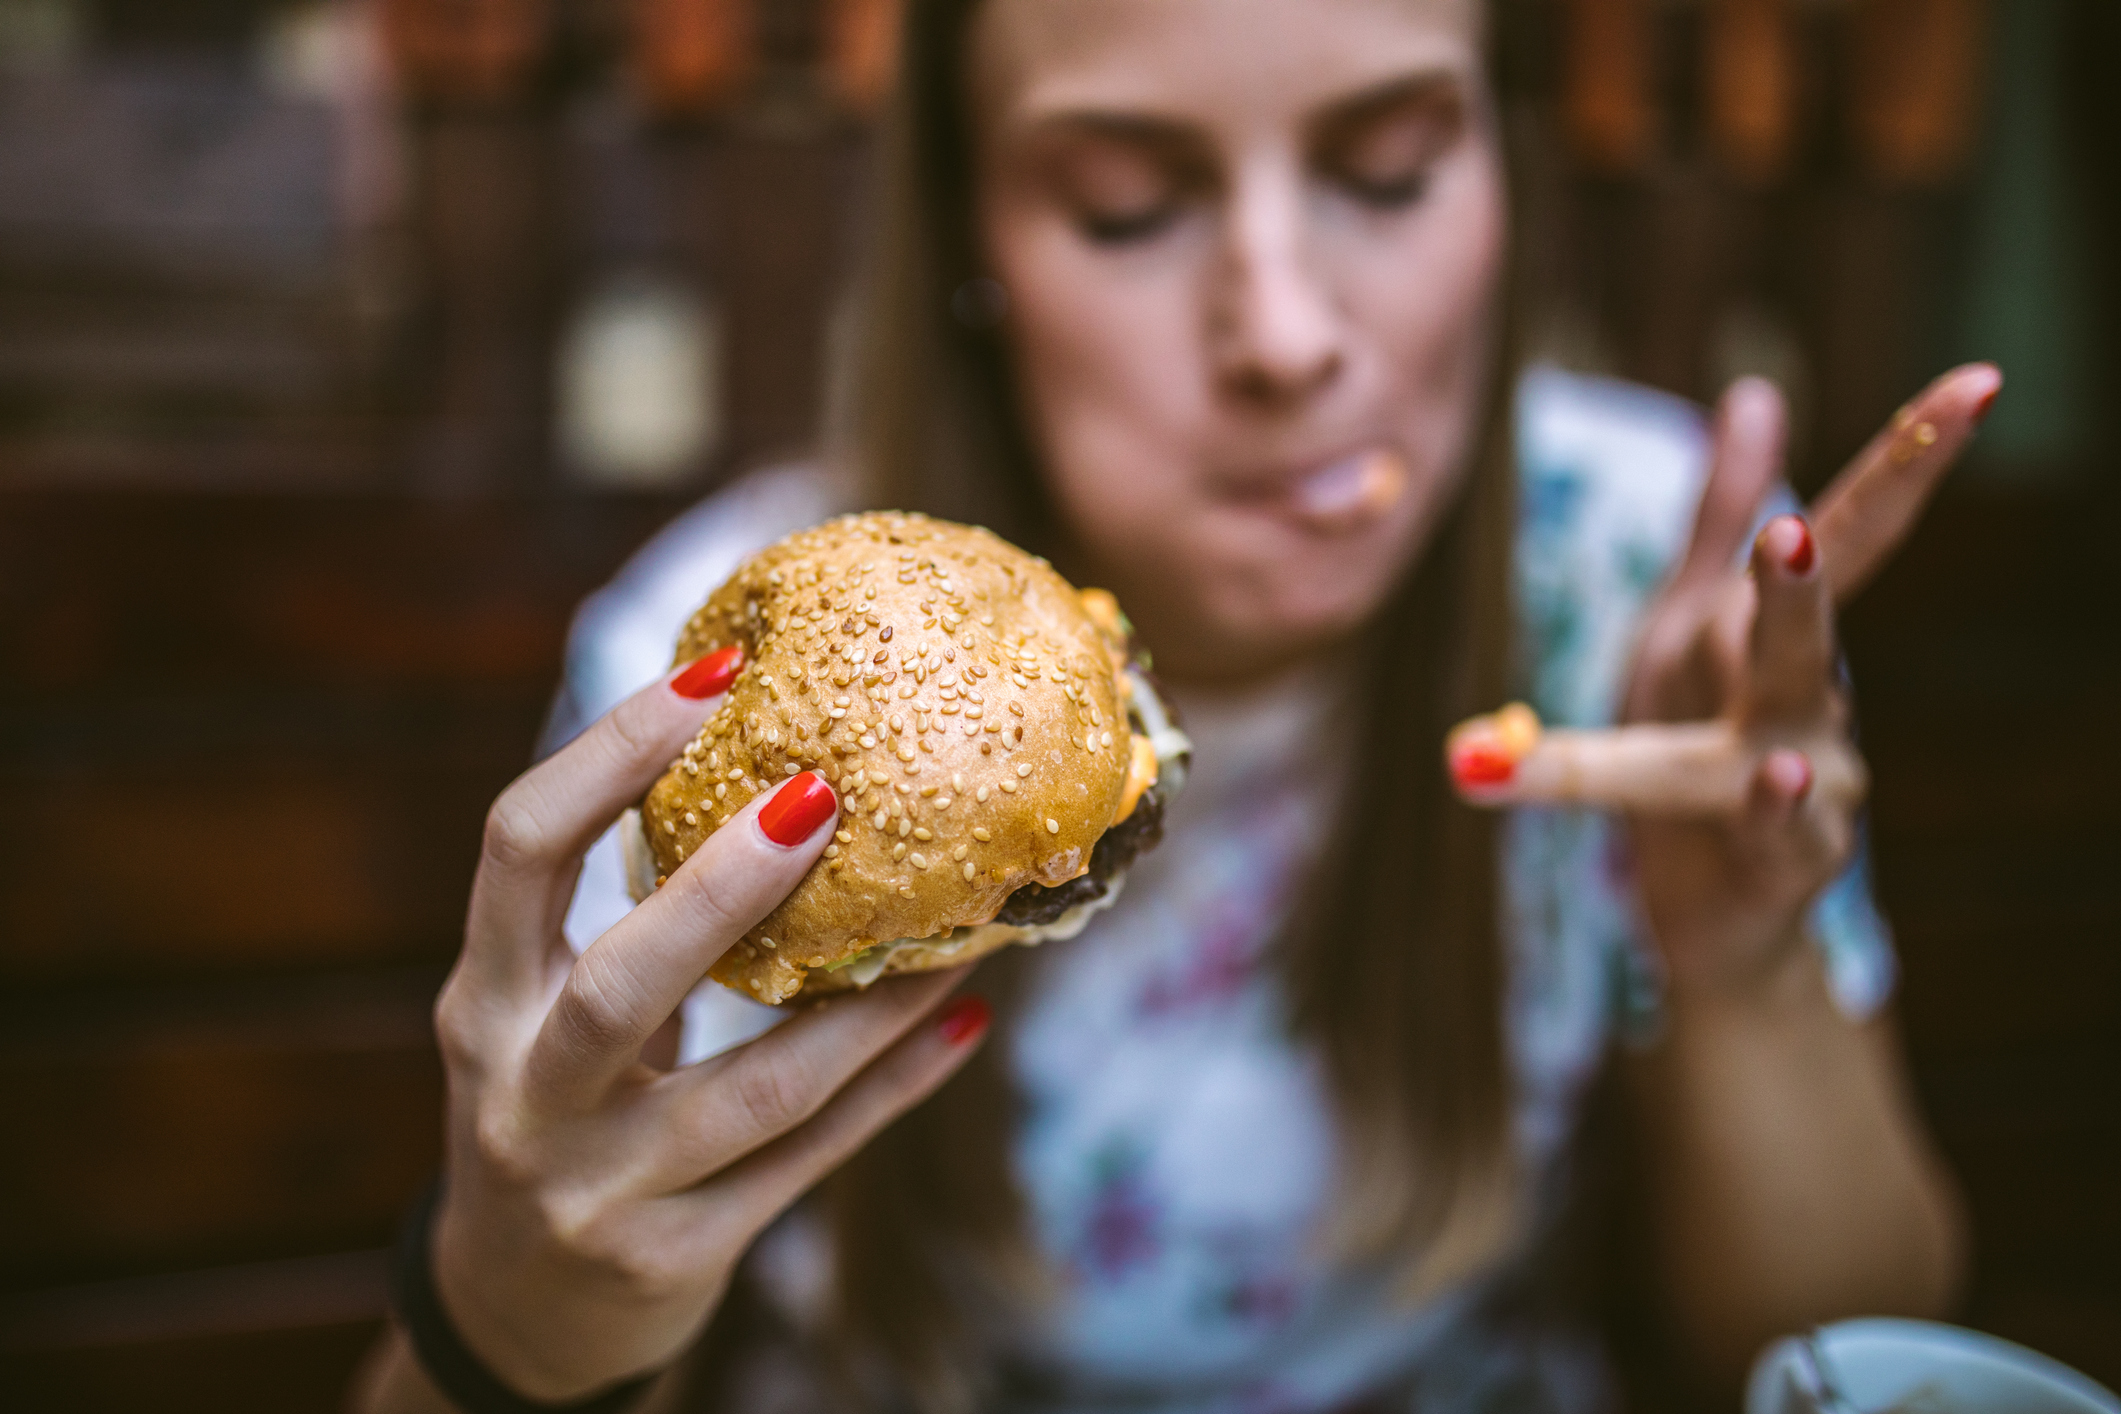 A woman eating a burger and licking cheese off of her finger.